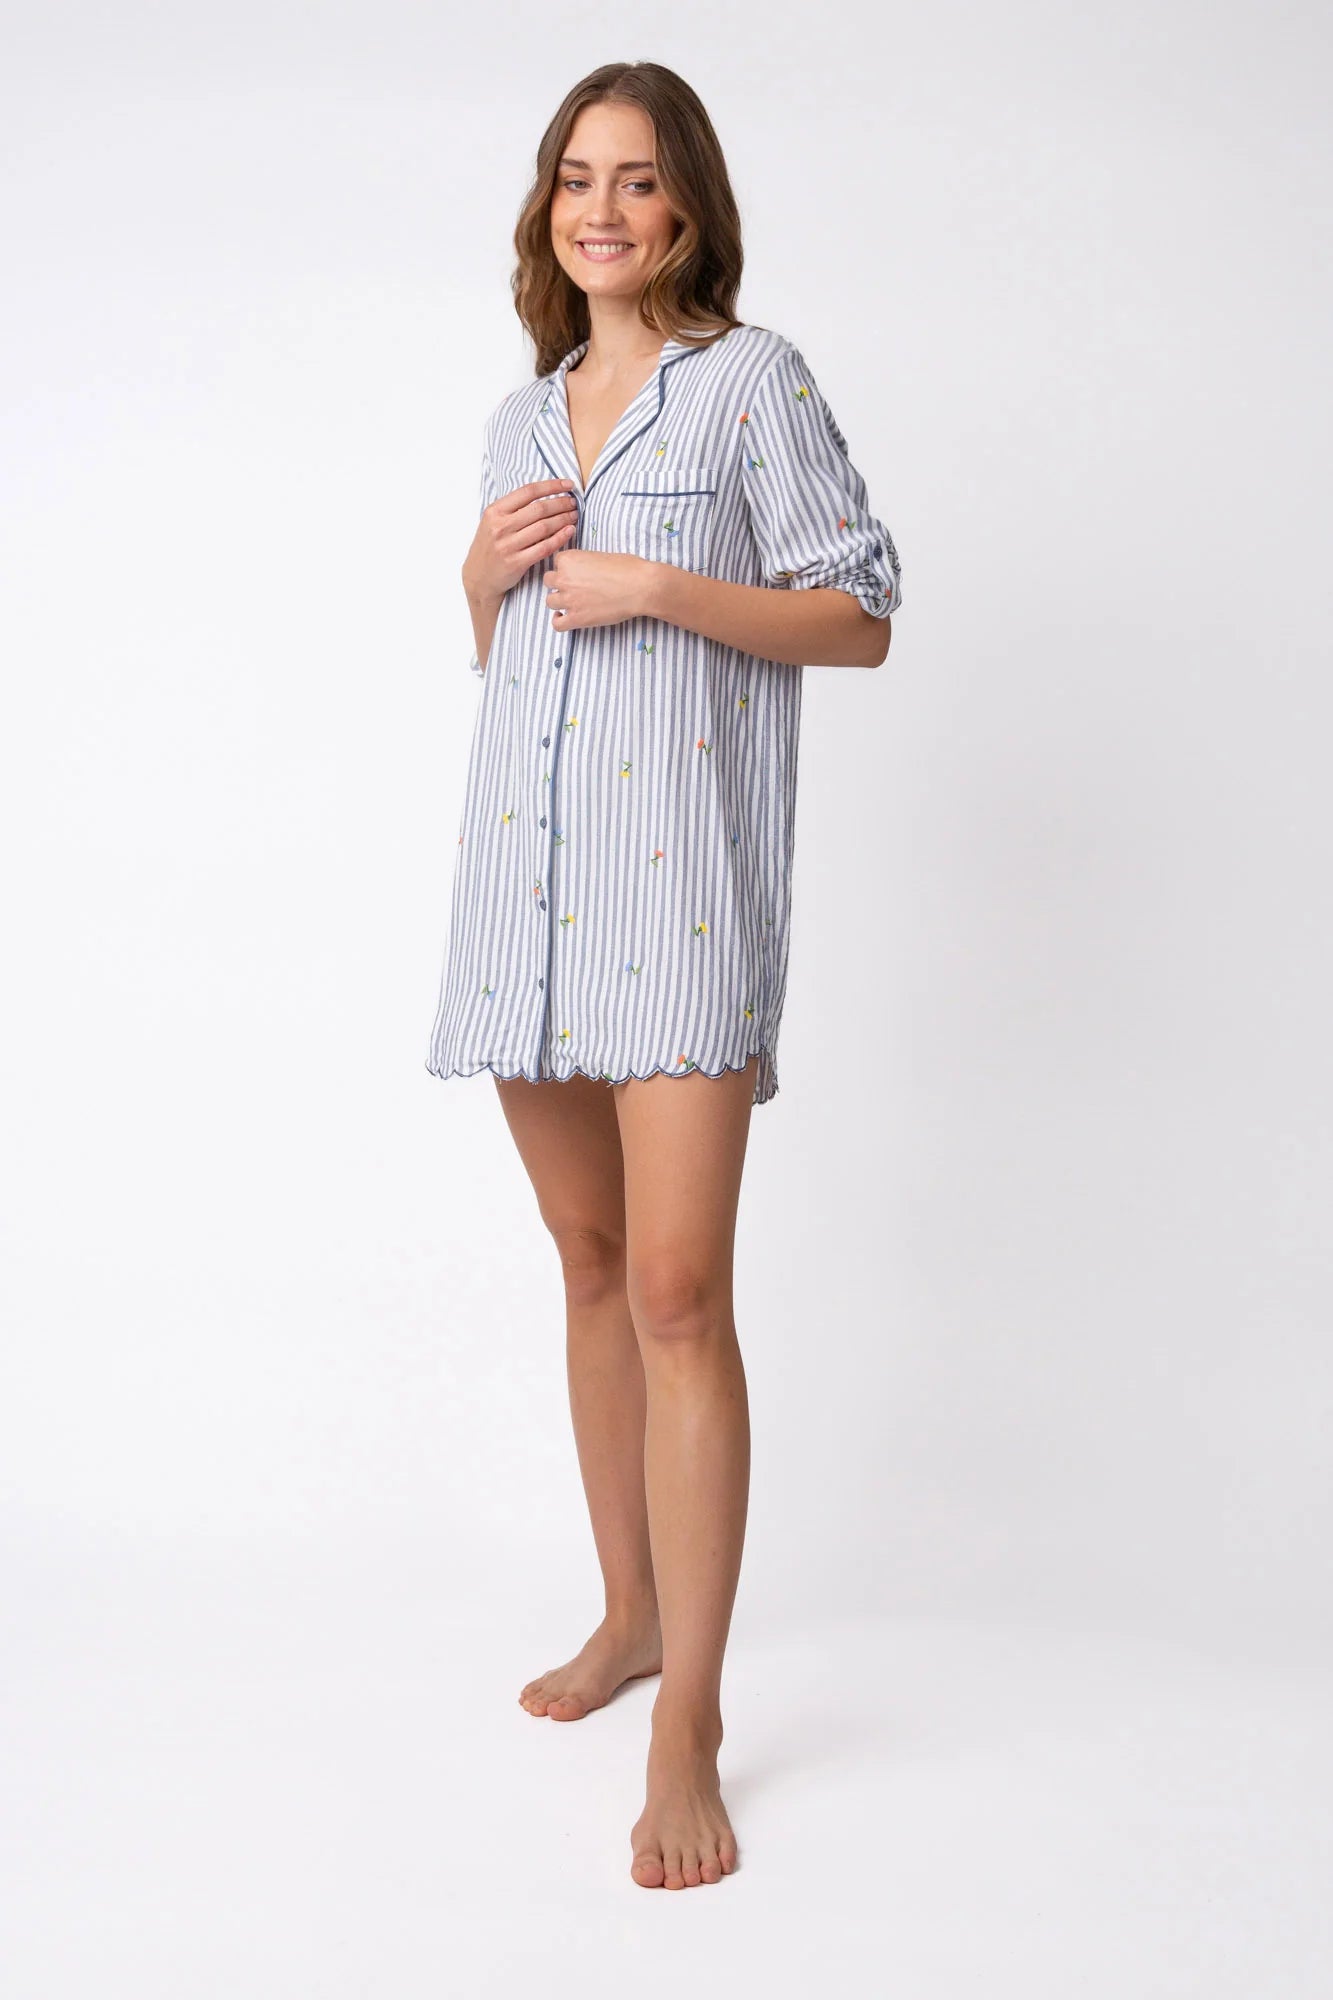 PJ Salvage Build Me Up Buttercup Nightshirt